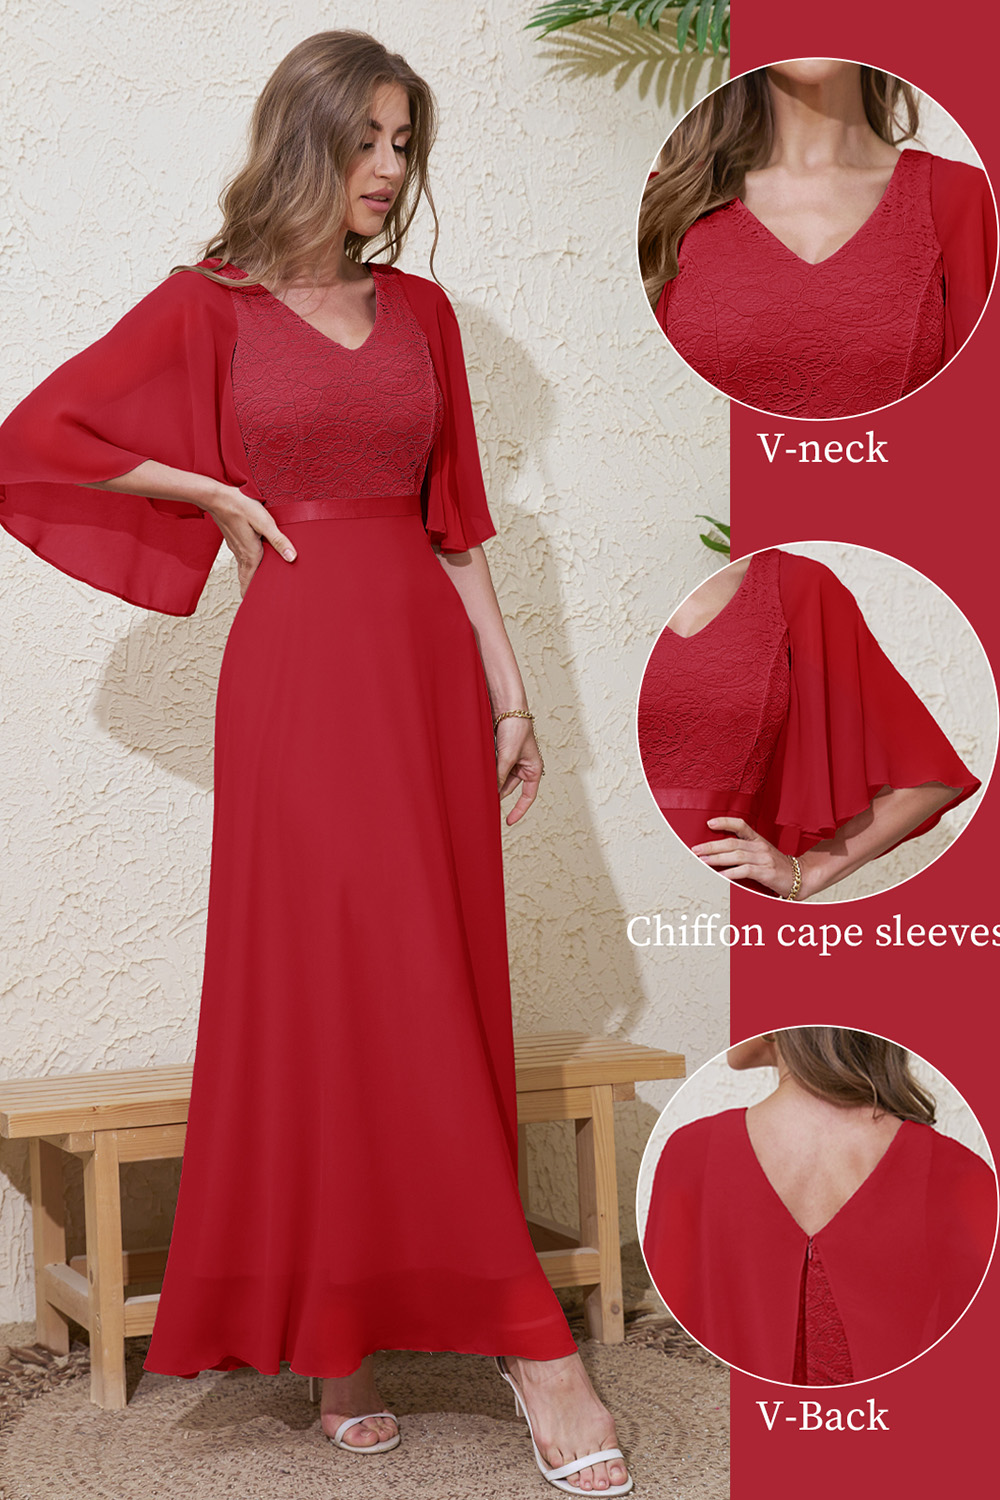 Elegant Red V-Neck Chiffon Evening Gown for Formal Occasions